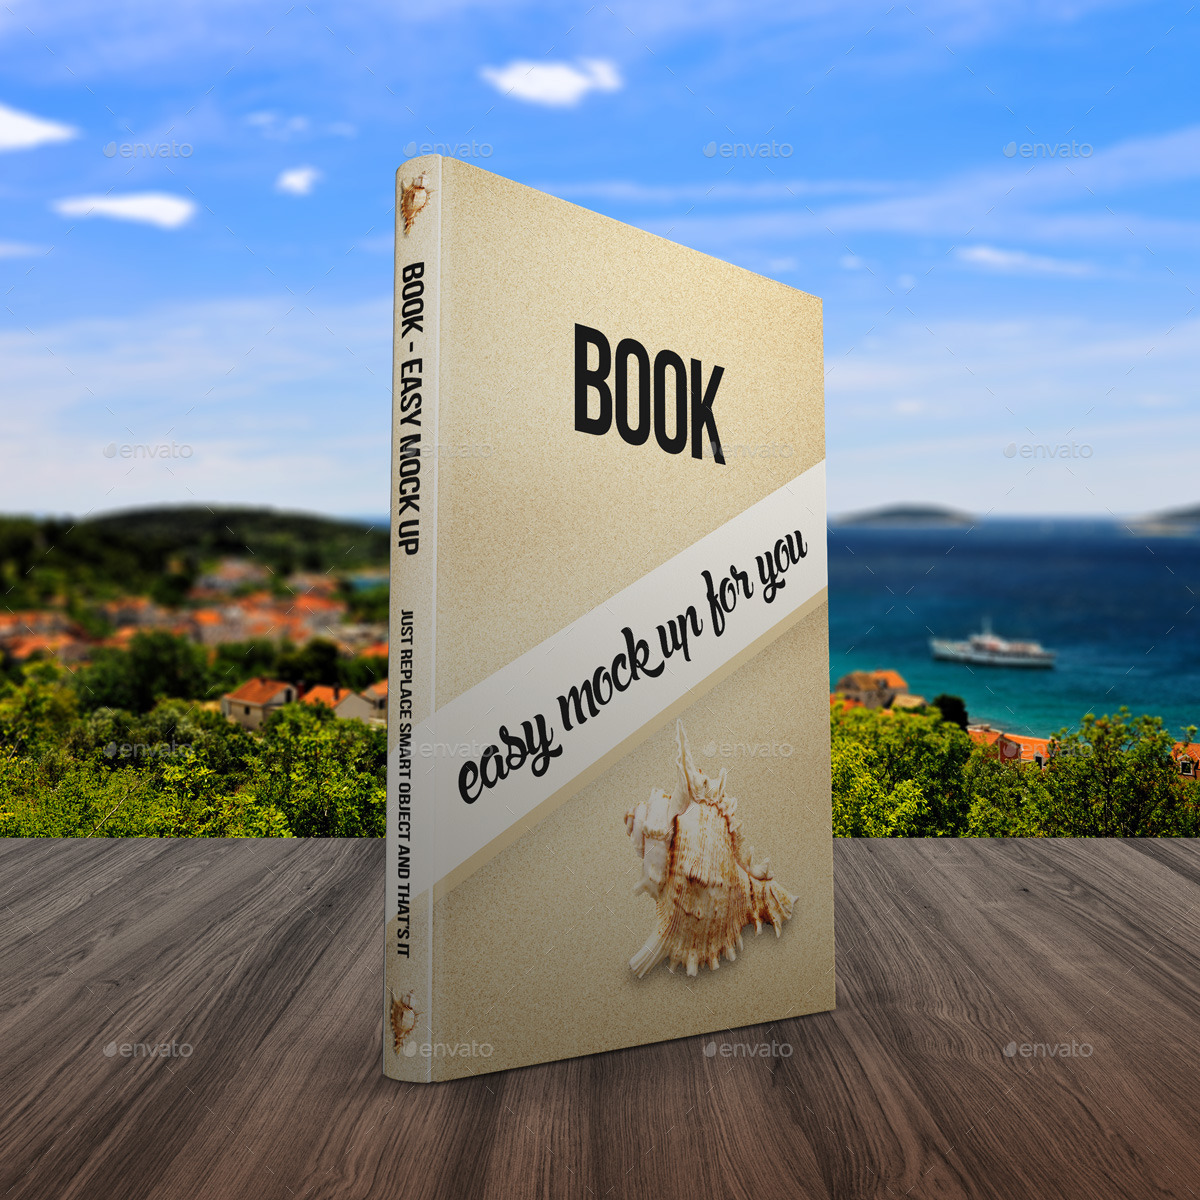 Download Book Mock Up - A5 Hard Cover by pozitivo | GraphicRiver